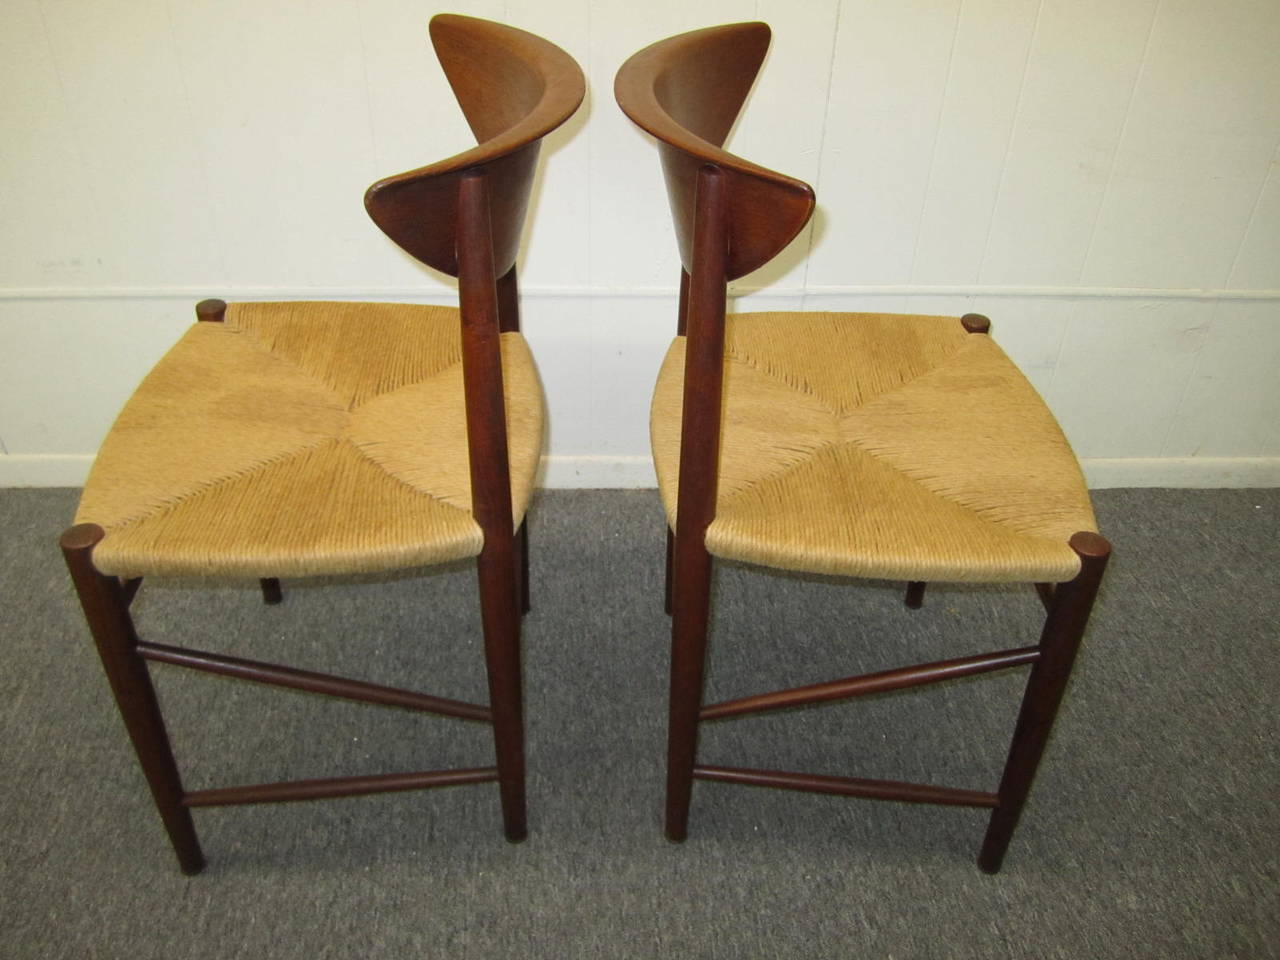 Excellent pair of Hvidt Molgaard teak dining chairs with newly rushed seats.  The chairs have a lovely timeworn honey brown patina and are tight and sturdy.  We do have a matching pair of arm chairs if your looking for more pieces to this collection